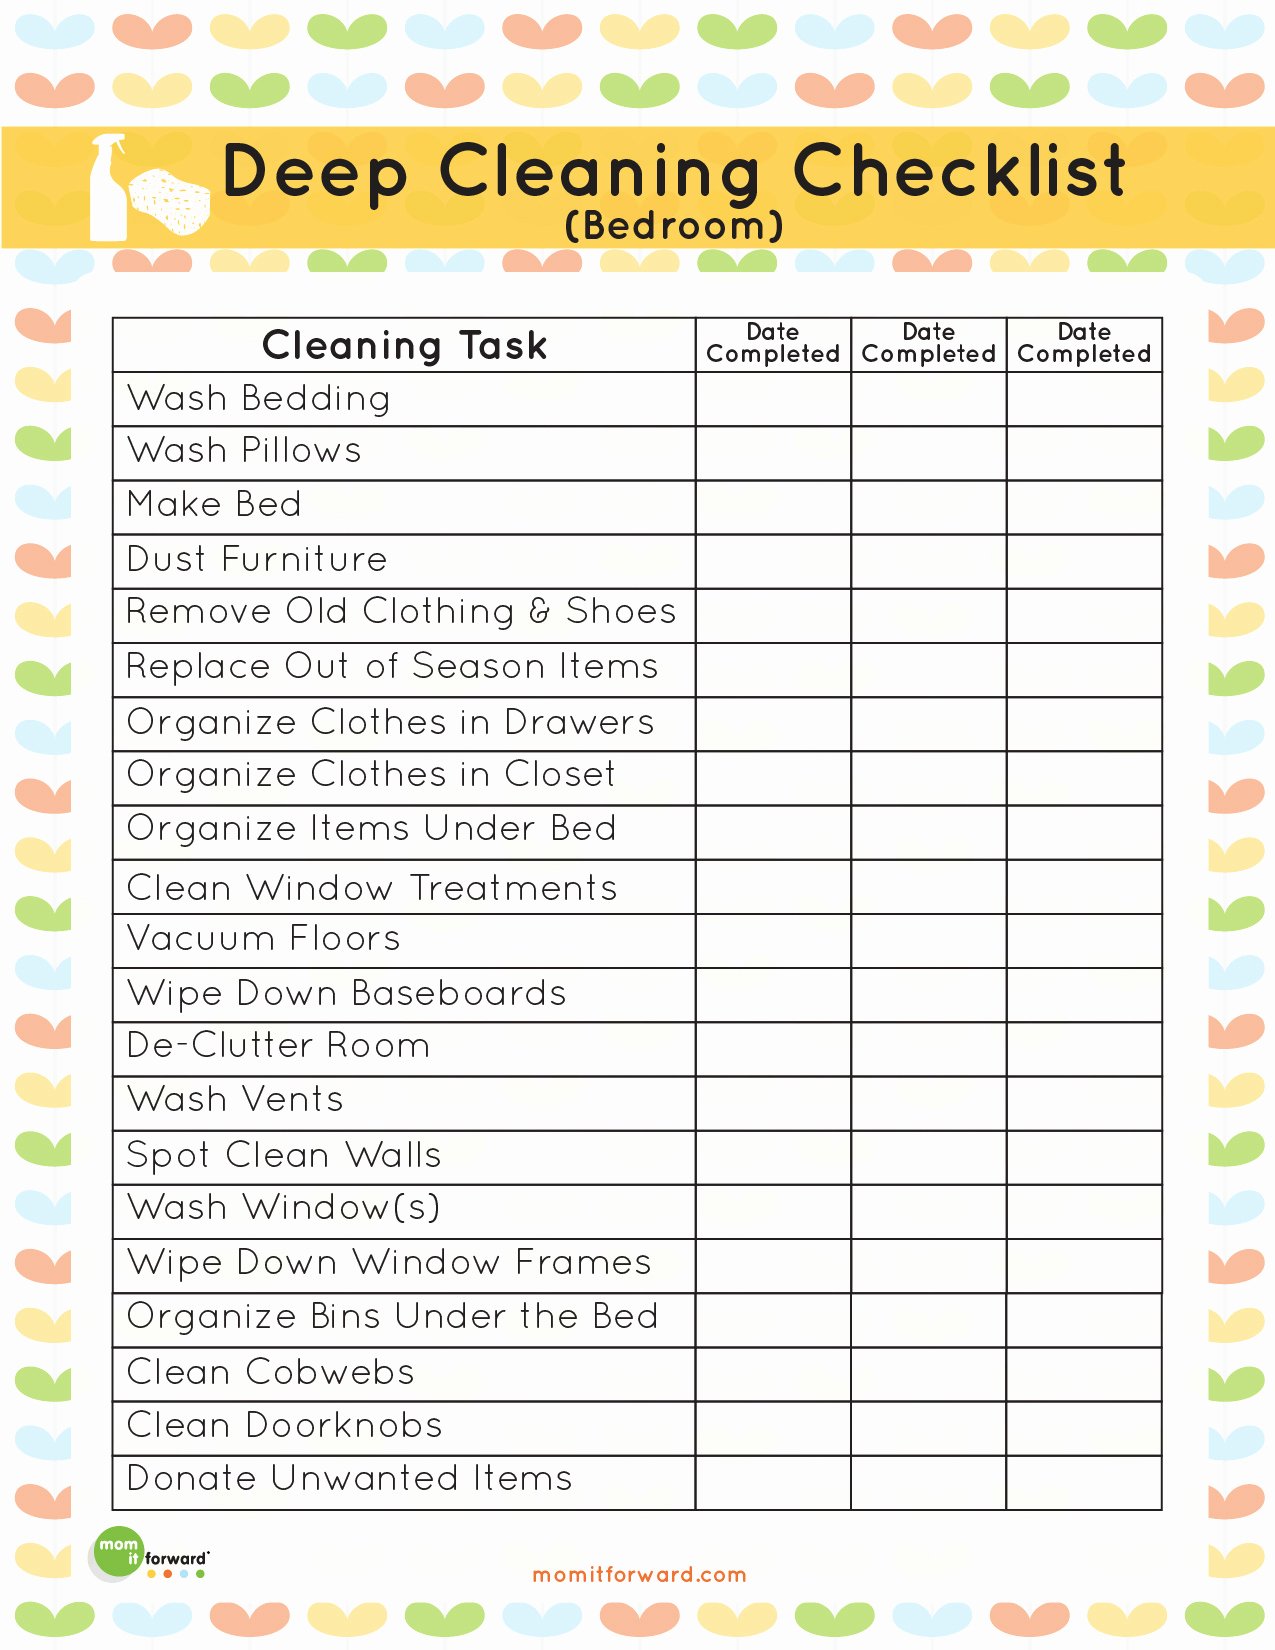 Deep Cleaning Checklist Template Lovely organization Deep Cleaning Your Bedroom Mom It forward